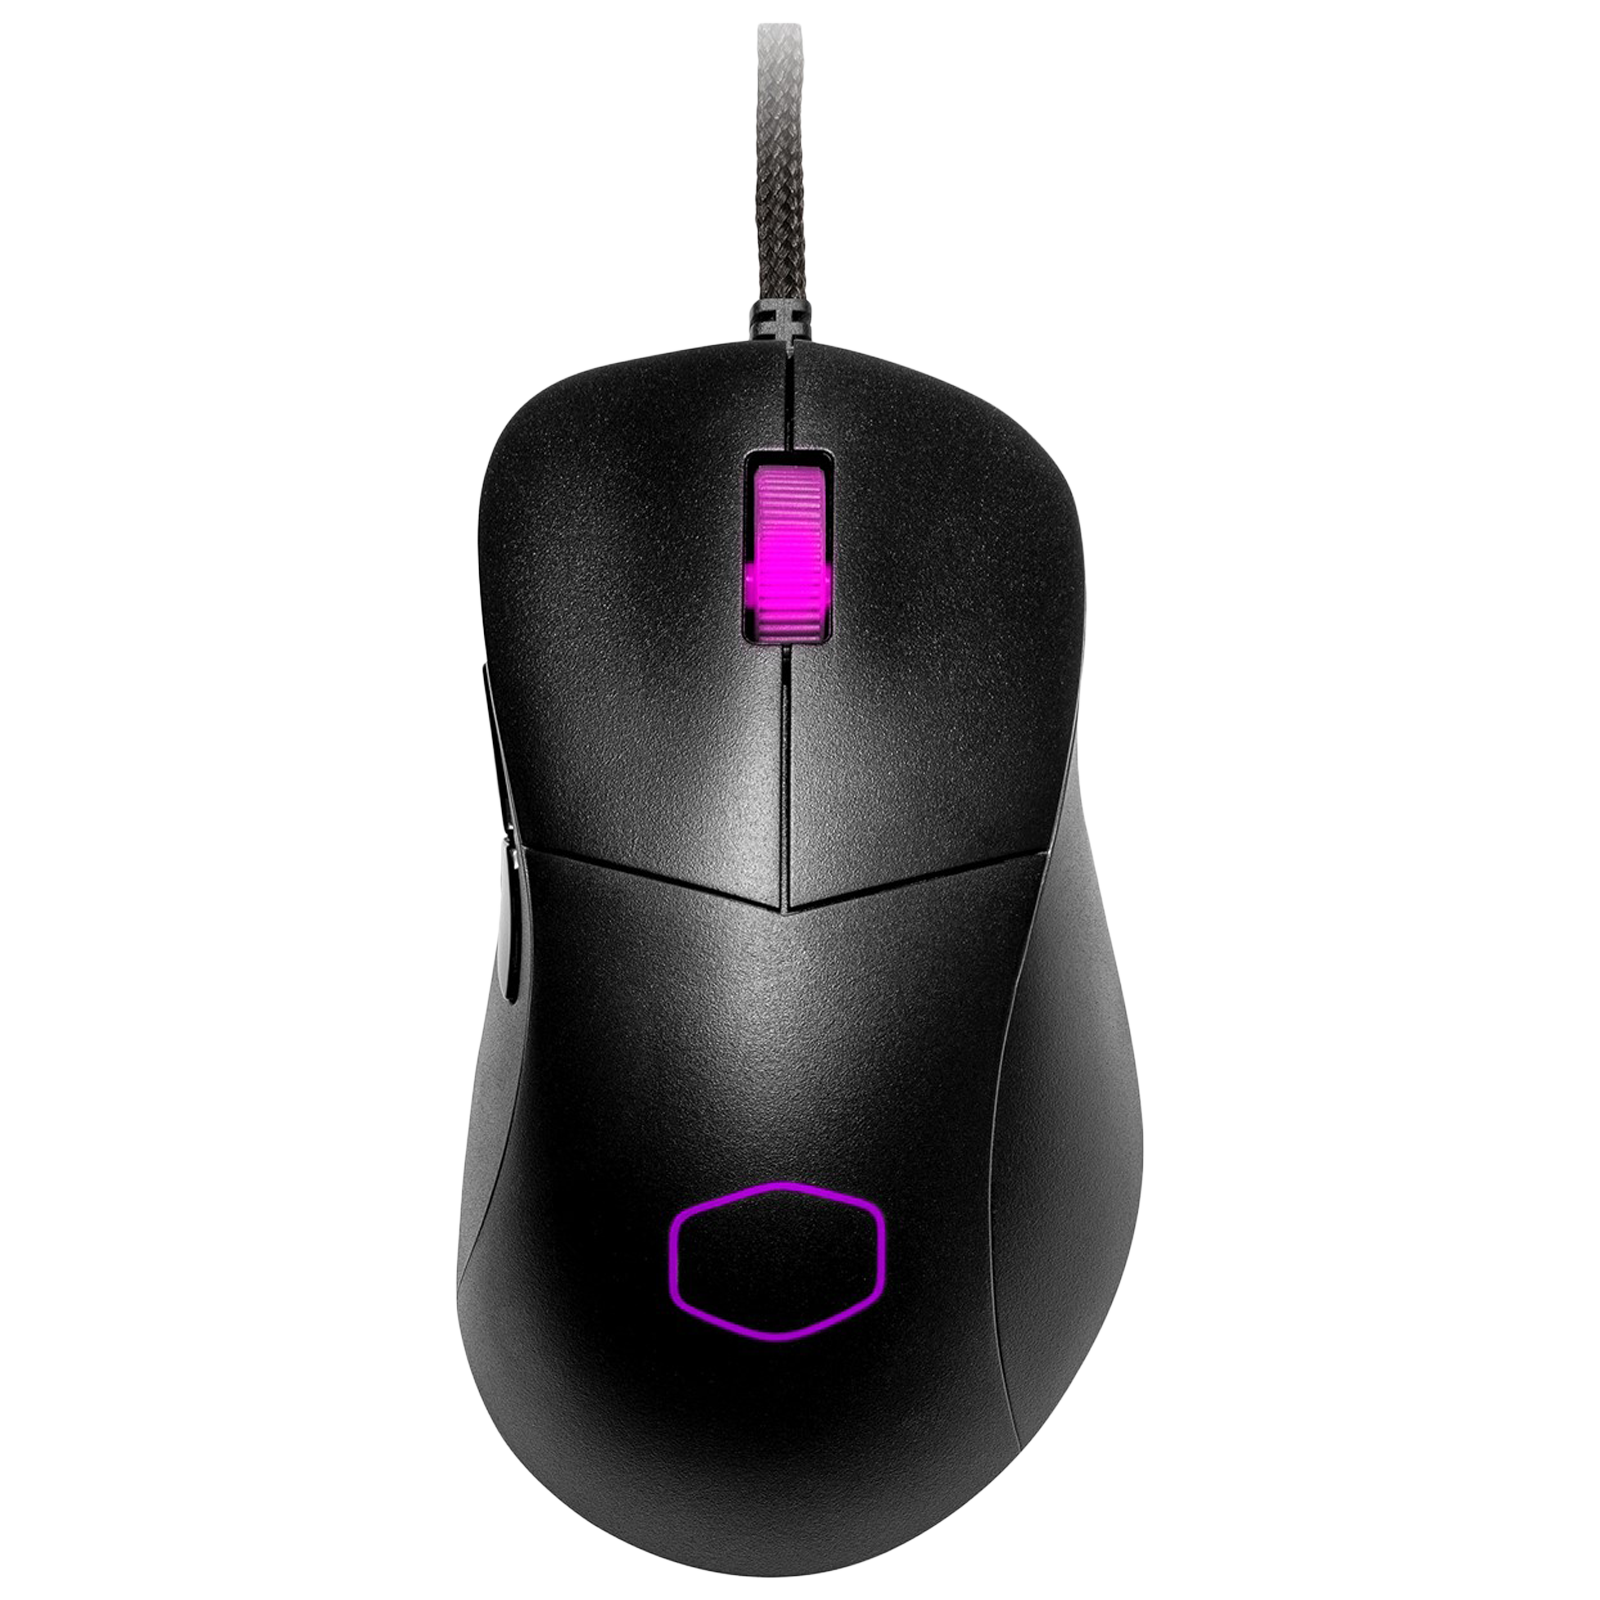 Buy Cooler Master MM730 Wired Gaming Mouse (16,000 DPI, Gold